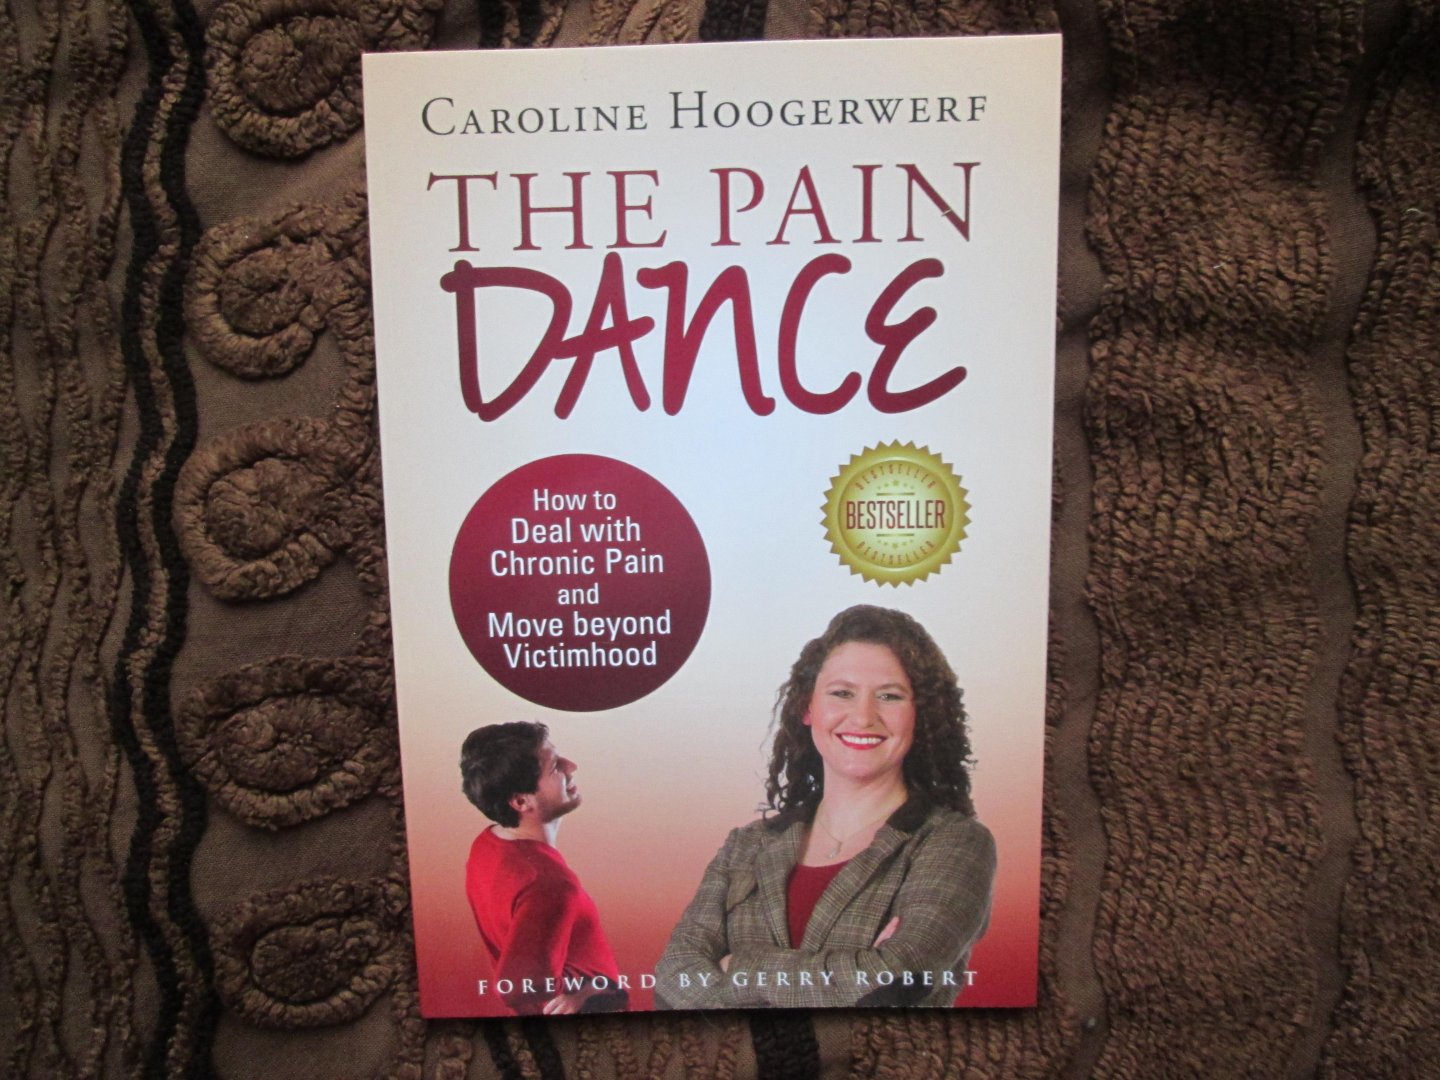 Hoogerwerf , Caroline - THE PAIN DANCE ; How to Deal with Chronic Pain and Move beyond Victimhood